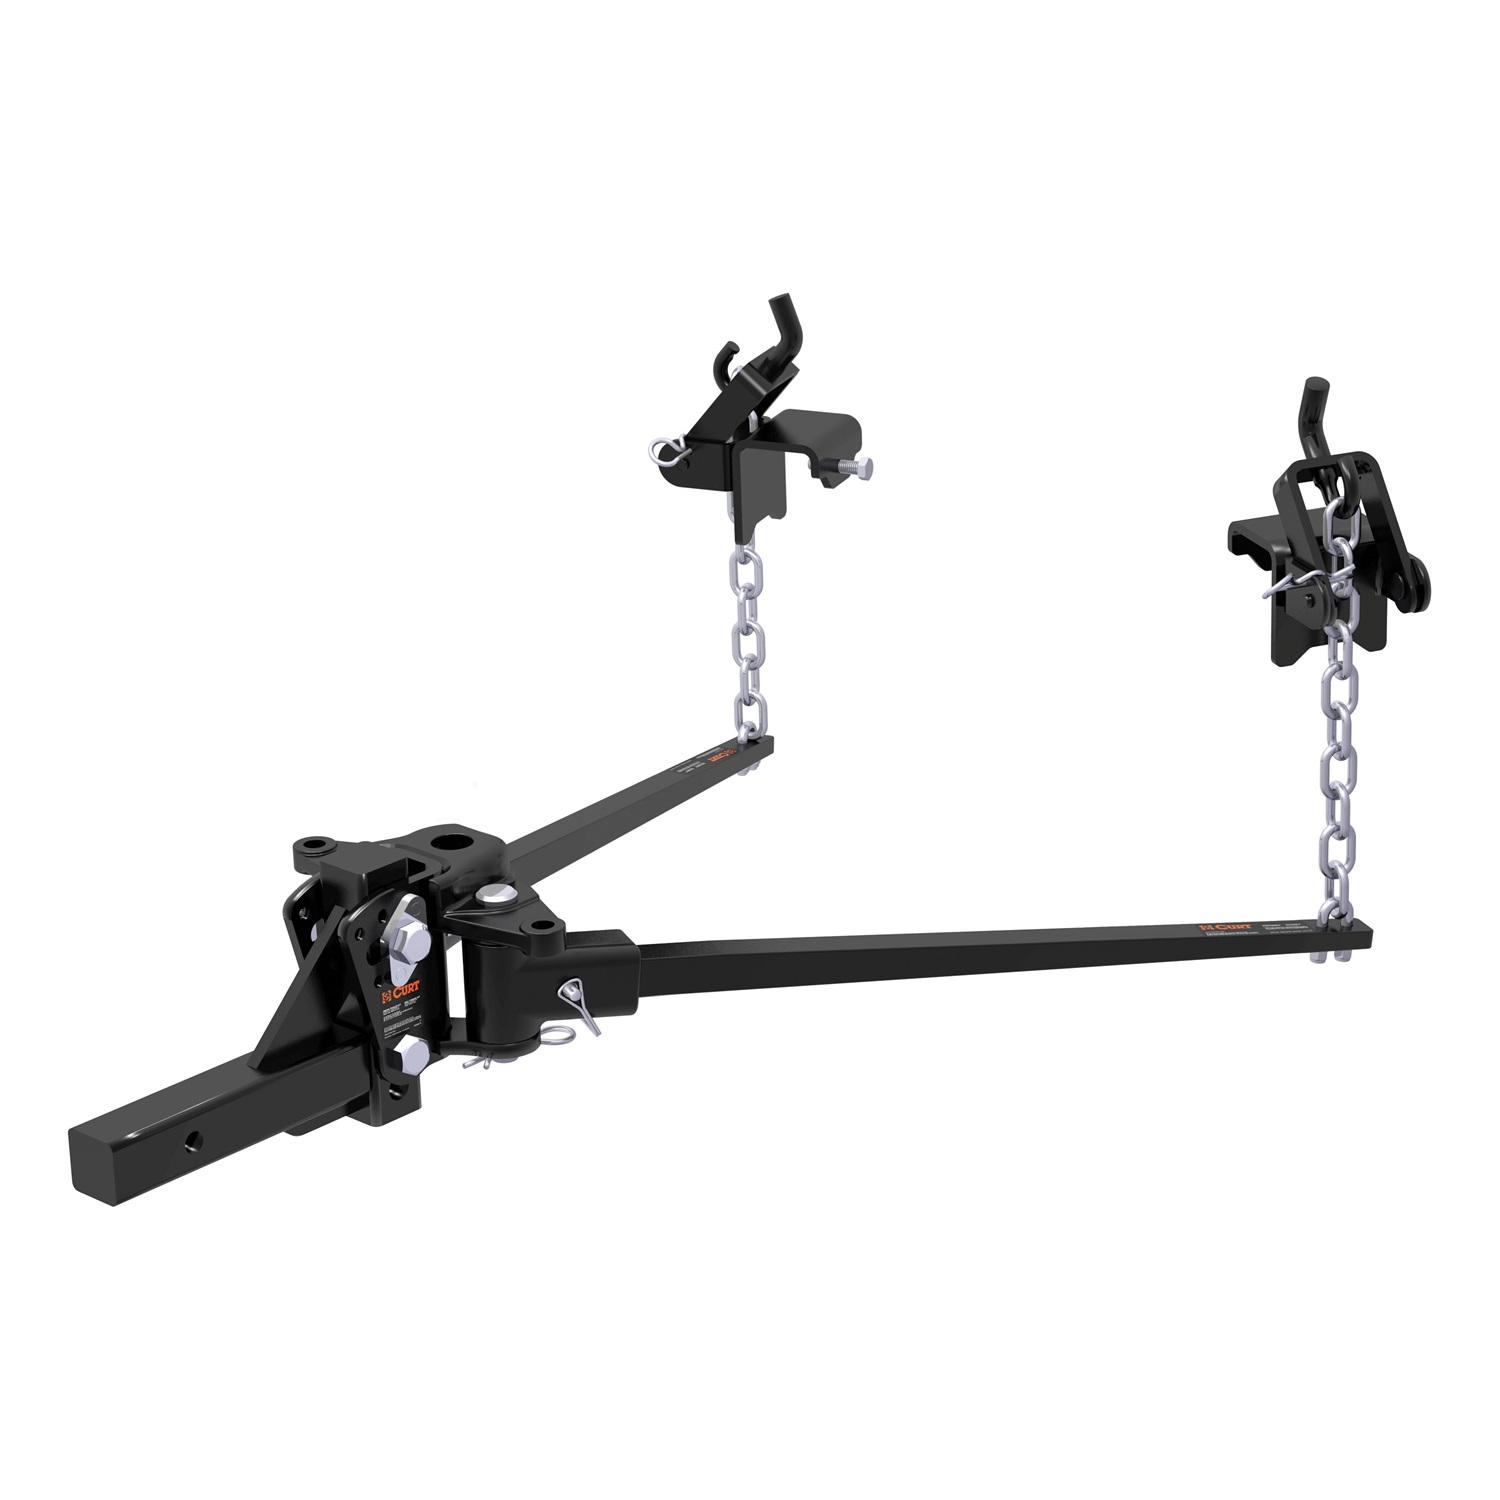 CURT Manufacturing CURT Manufacturing 17342 Weight Distributing Hitch; Trunion Bar  Fits